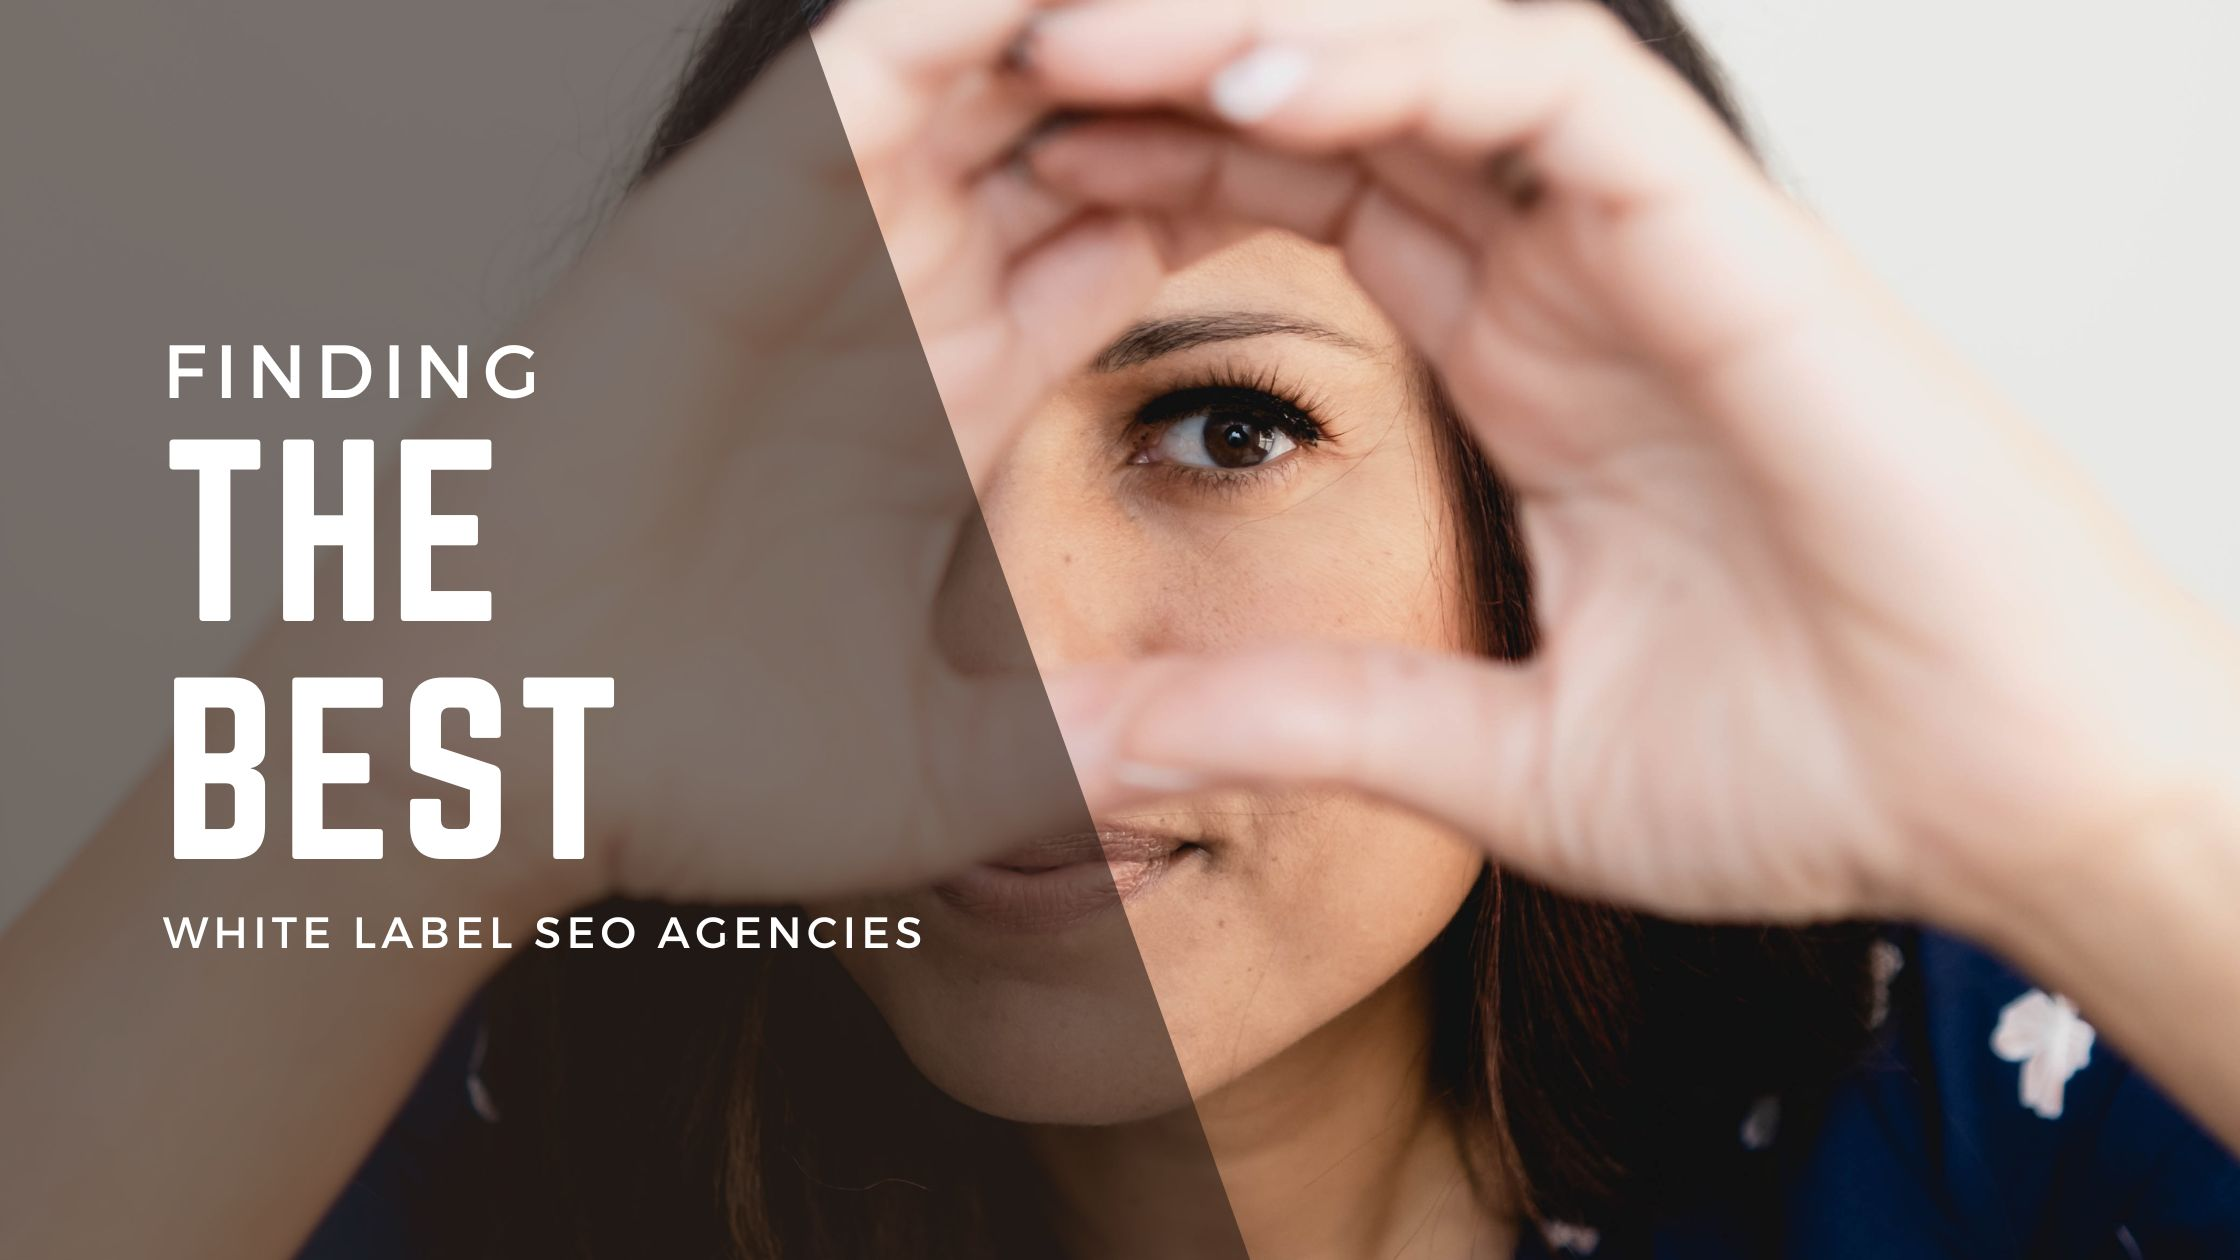 Crystal looking through her hands. Finding the best marketing agency to help you as a white label SEO reseller really depends on your client needs. Do you need local SEO? A full SEO campaign?